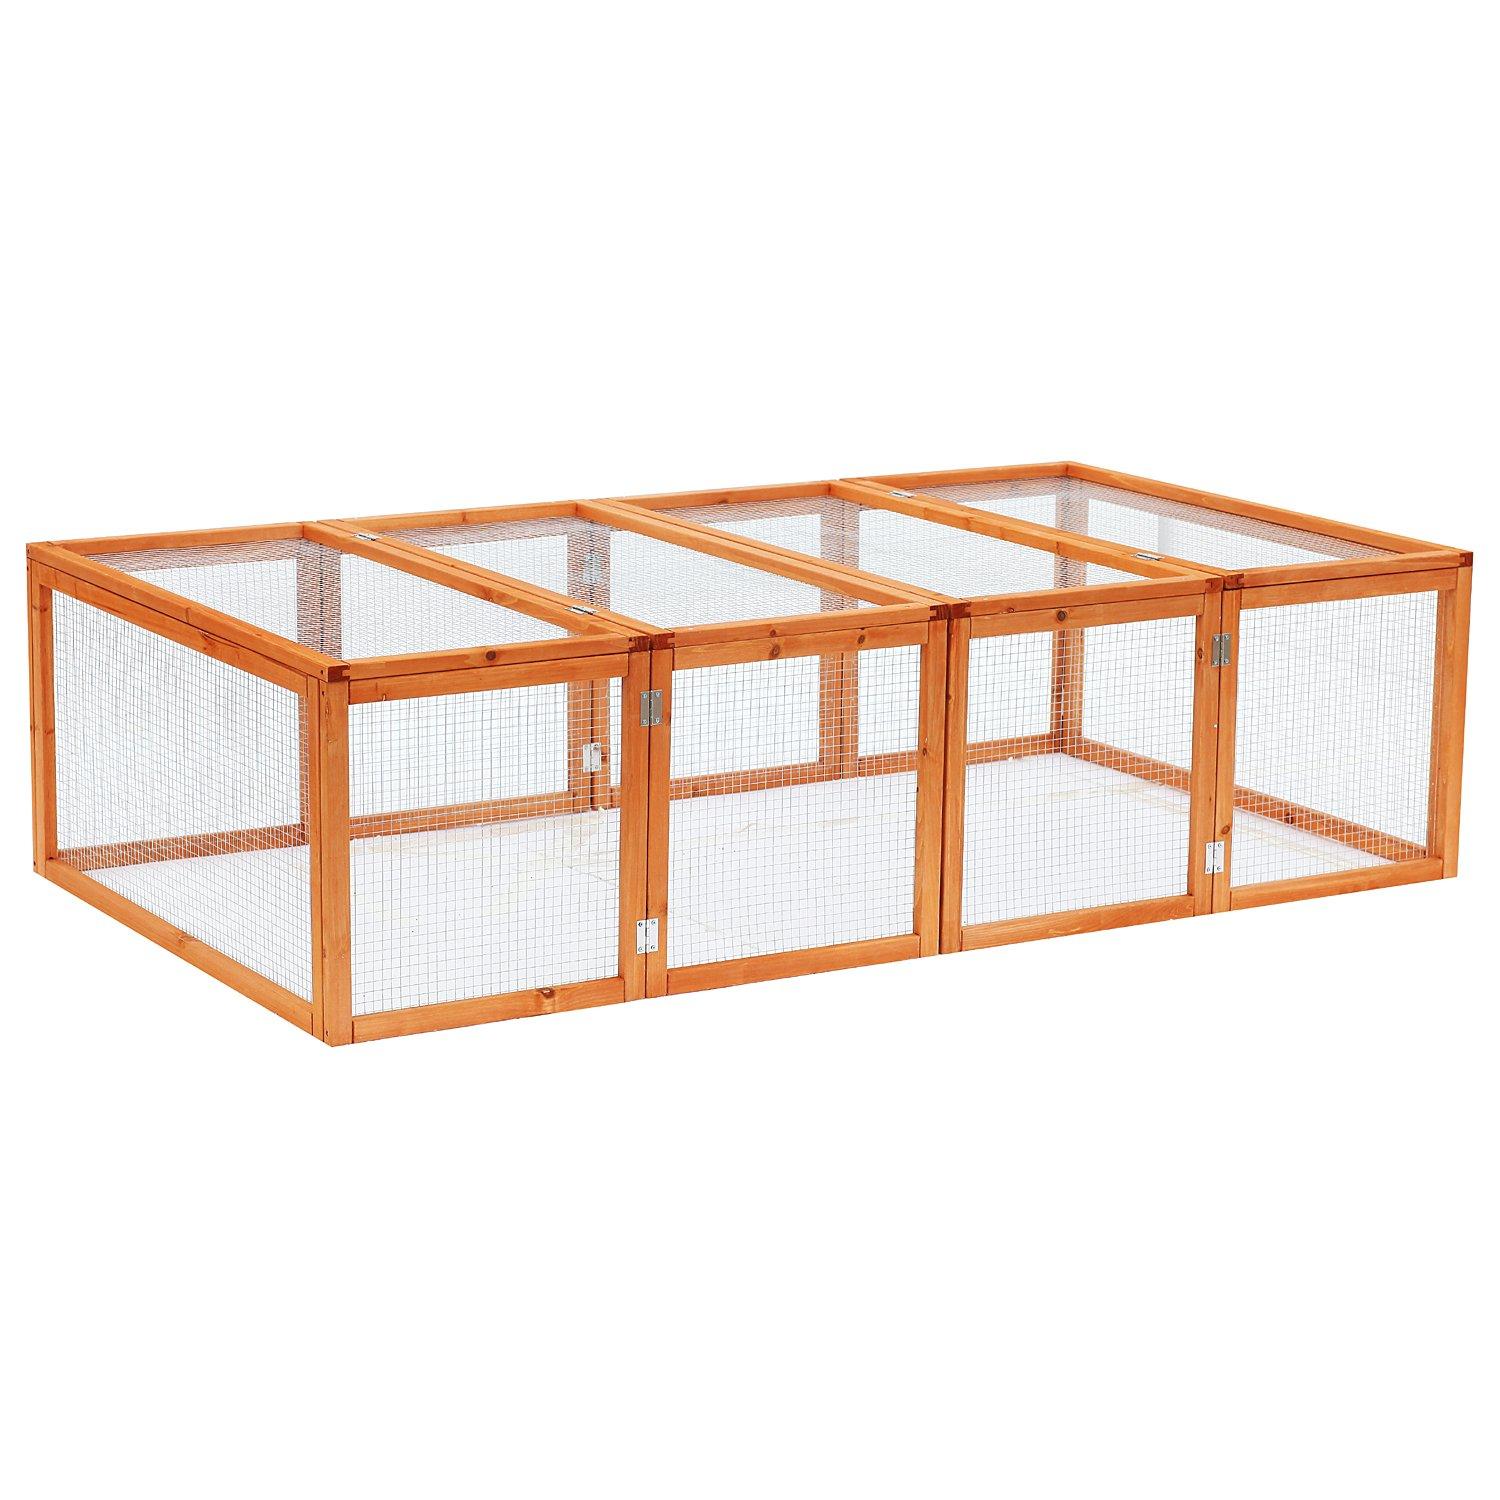 New Rabbit Hutch Cage with Run and Play Space Mesh Wire Safety